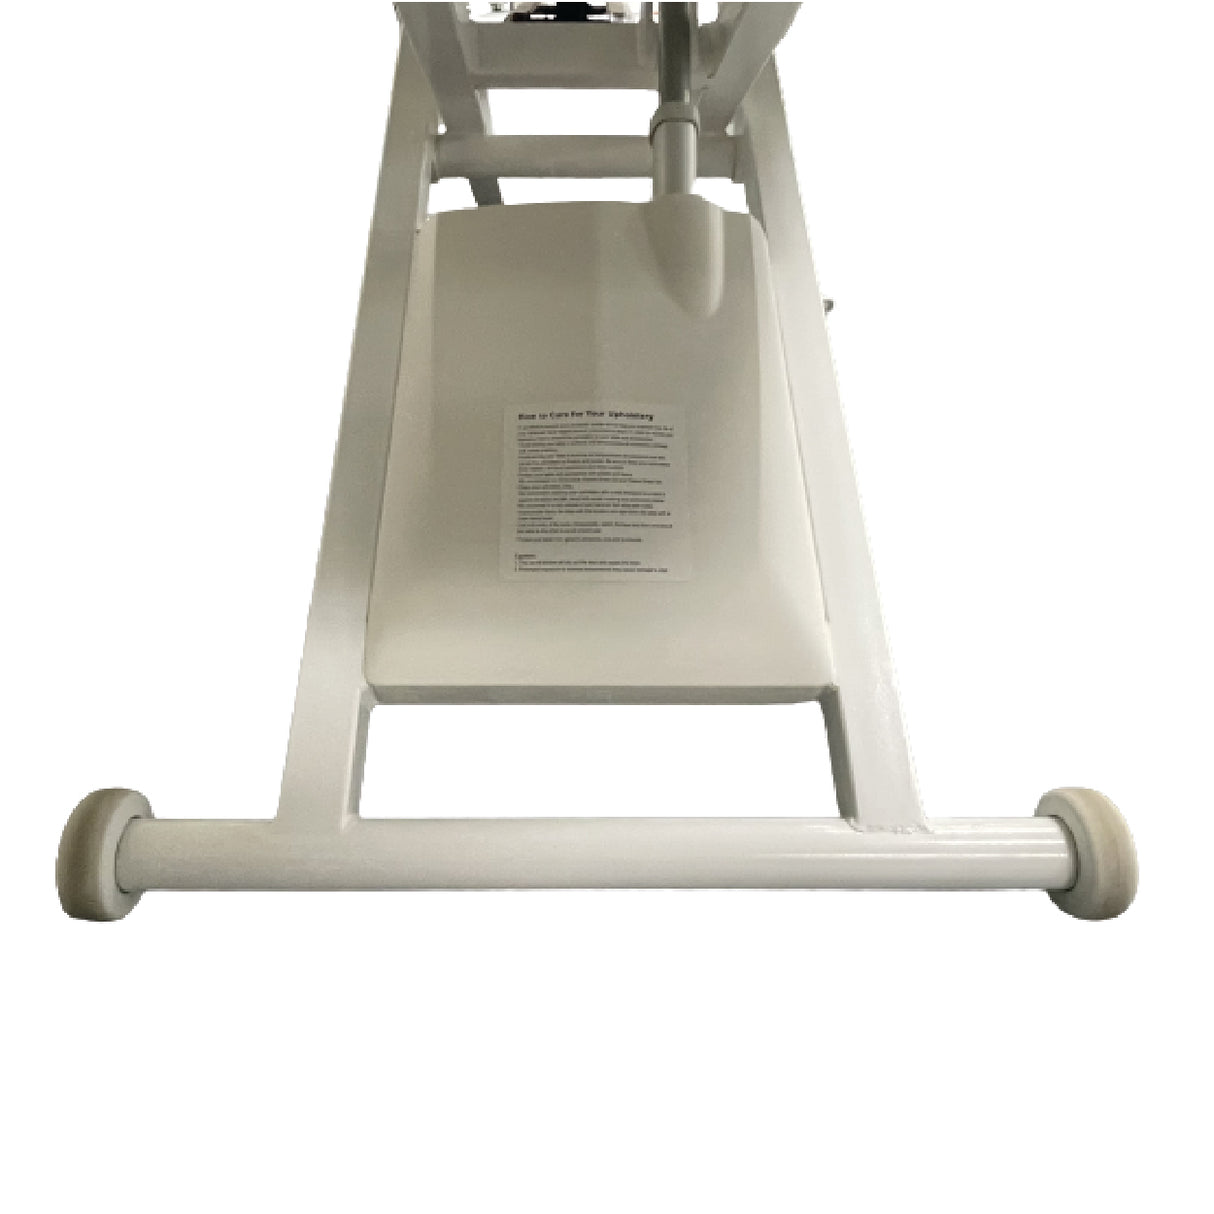 AS Series Cross Lift Structural Massage Table